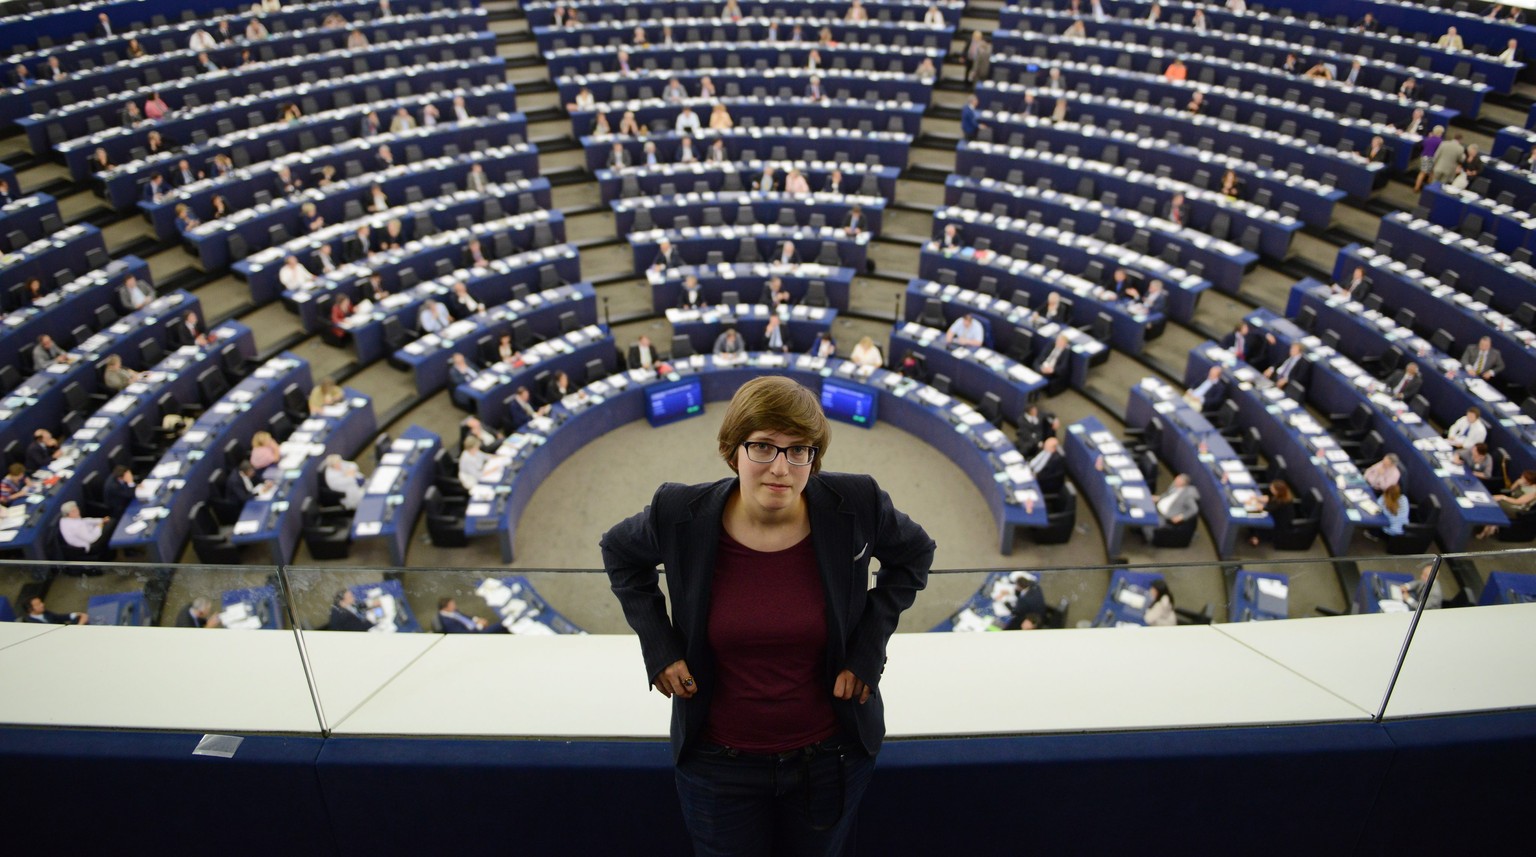 epa04295856 German Member of the European Parliament Julia Reda of the Pirate Party (Piratenpartei) poses during the second day of the first plenary session at European Parliament in Strasbourg, Franc ...